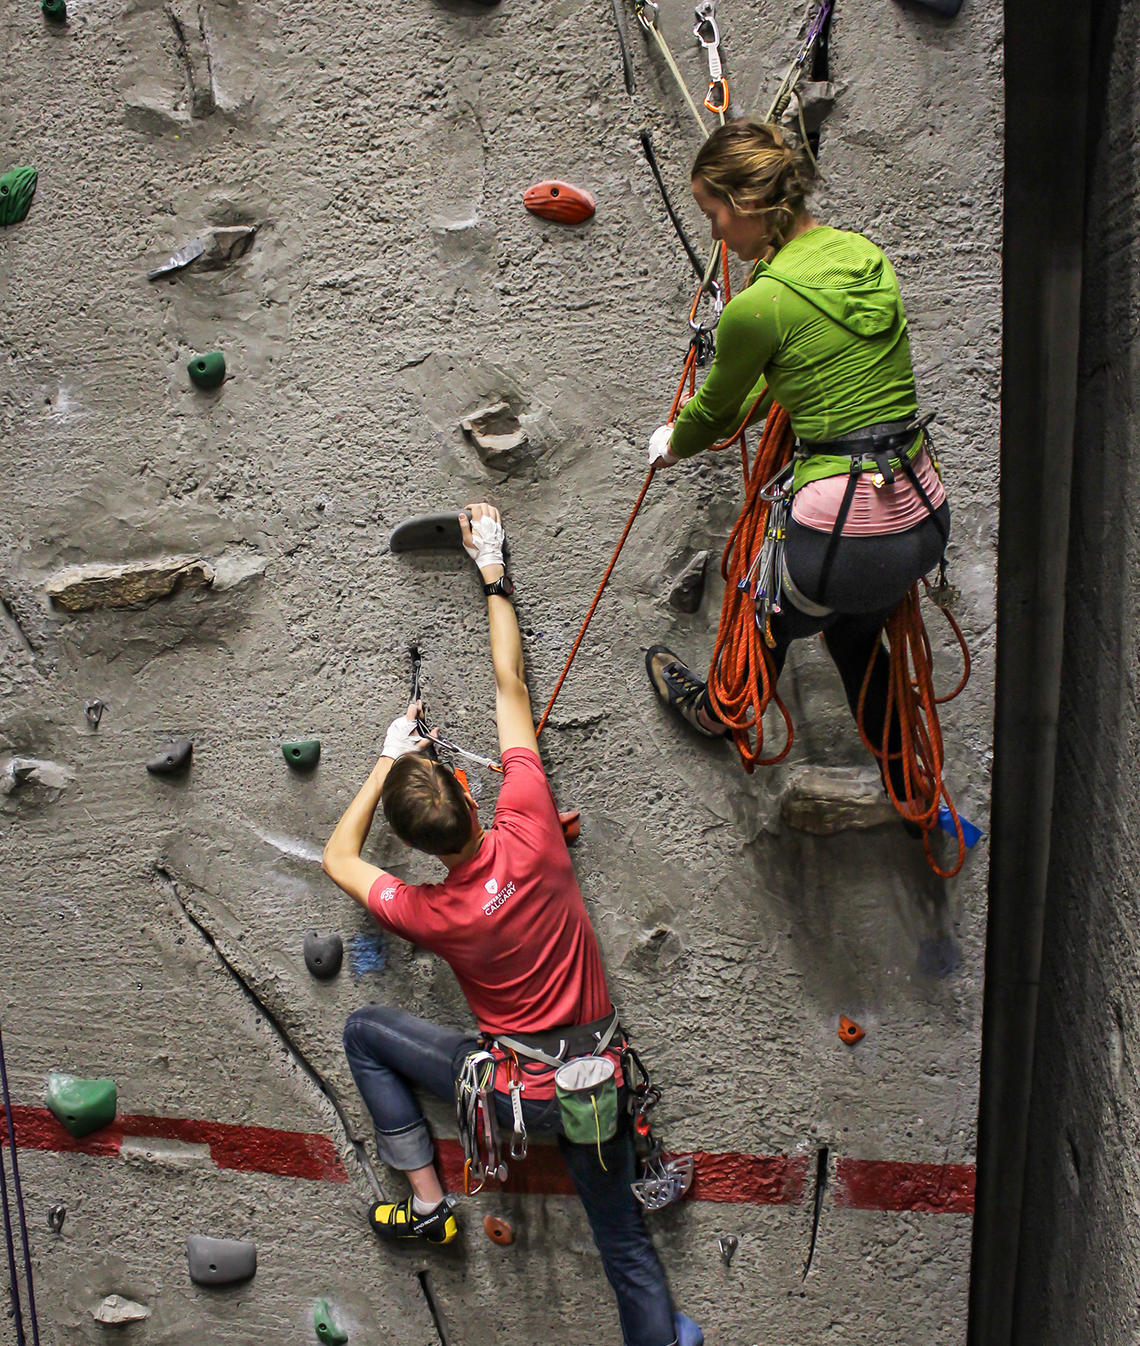 Two people on the climbing wall